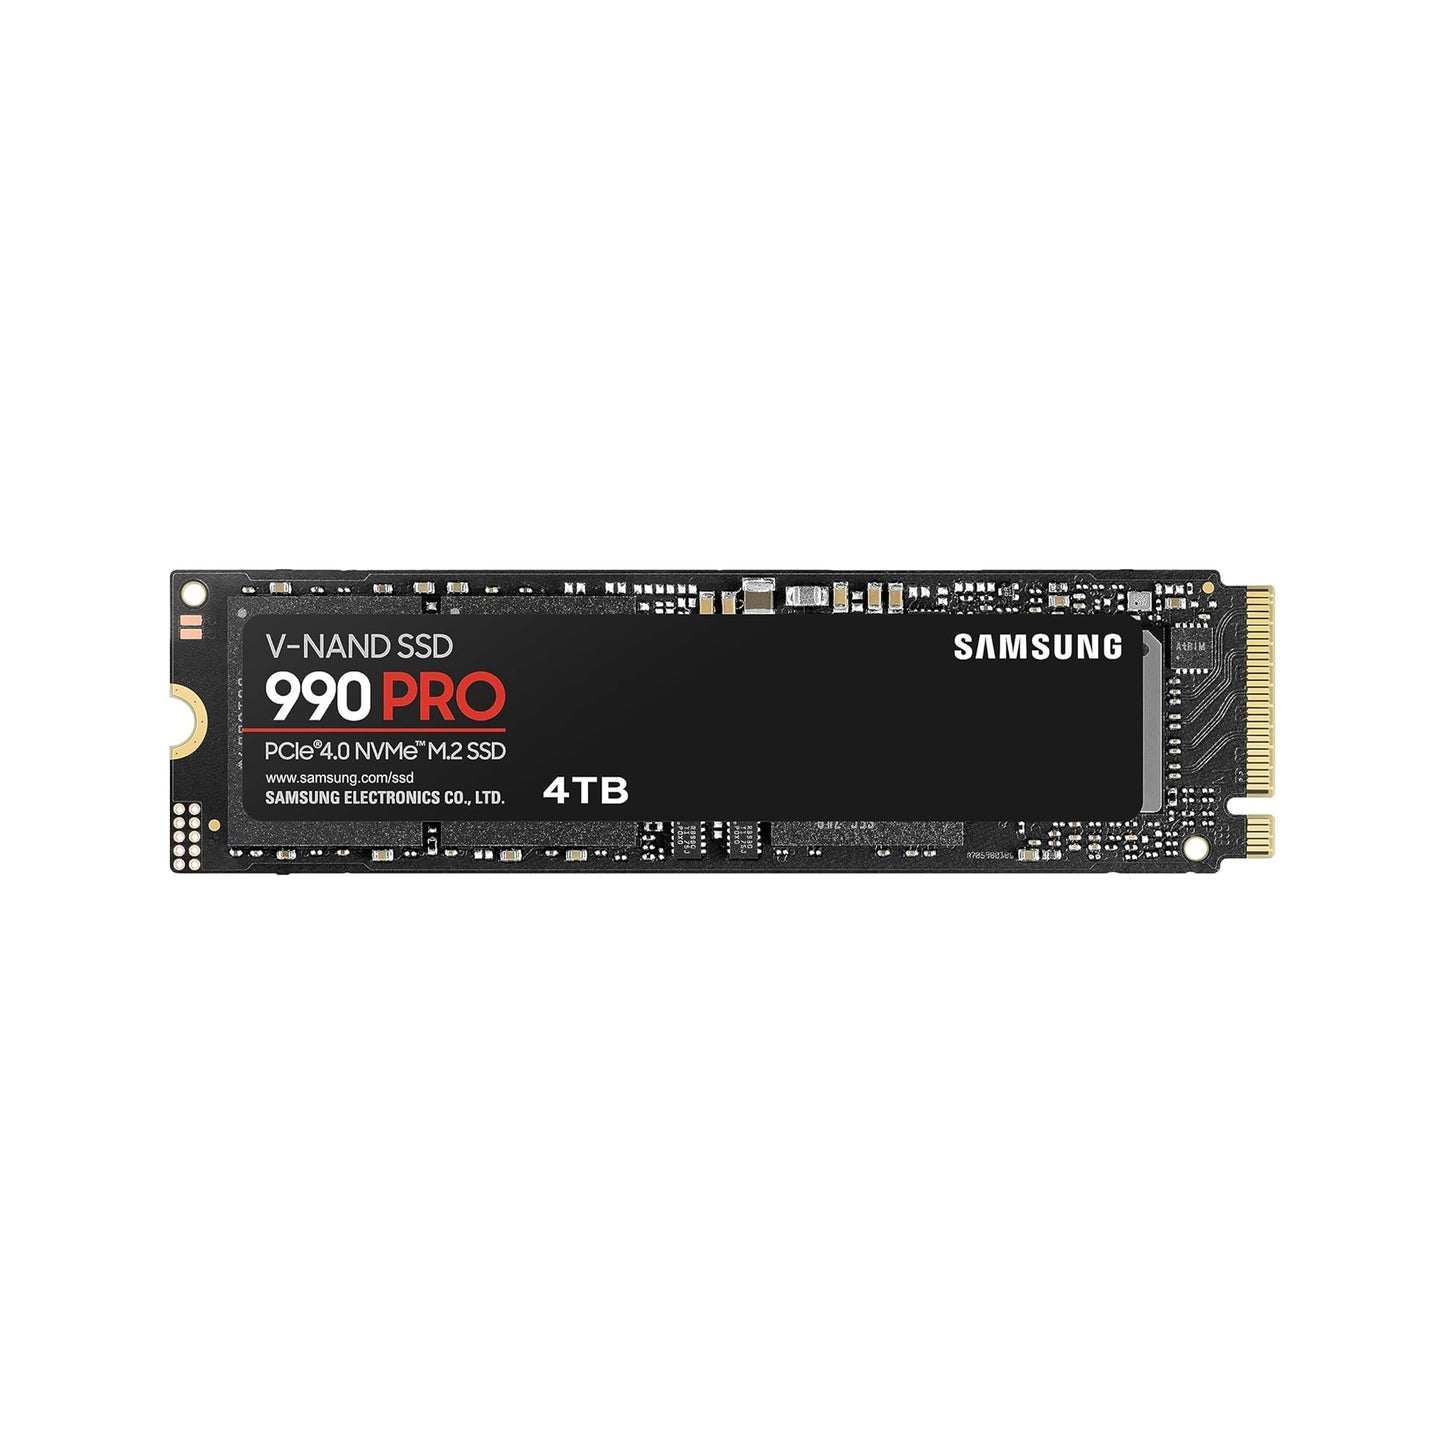 SAMSUNG 990 PRO SSD 4TB PCIe 4.0 M.2 2280 Internal Solid State Hard Drive, Seq. Read Speeds Up to 7,450 MB/s for High End Computing, Gaming, and Heavy Duty Workstations, MZ-V9P4T0B/AM, Black